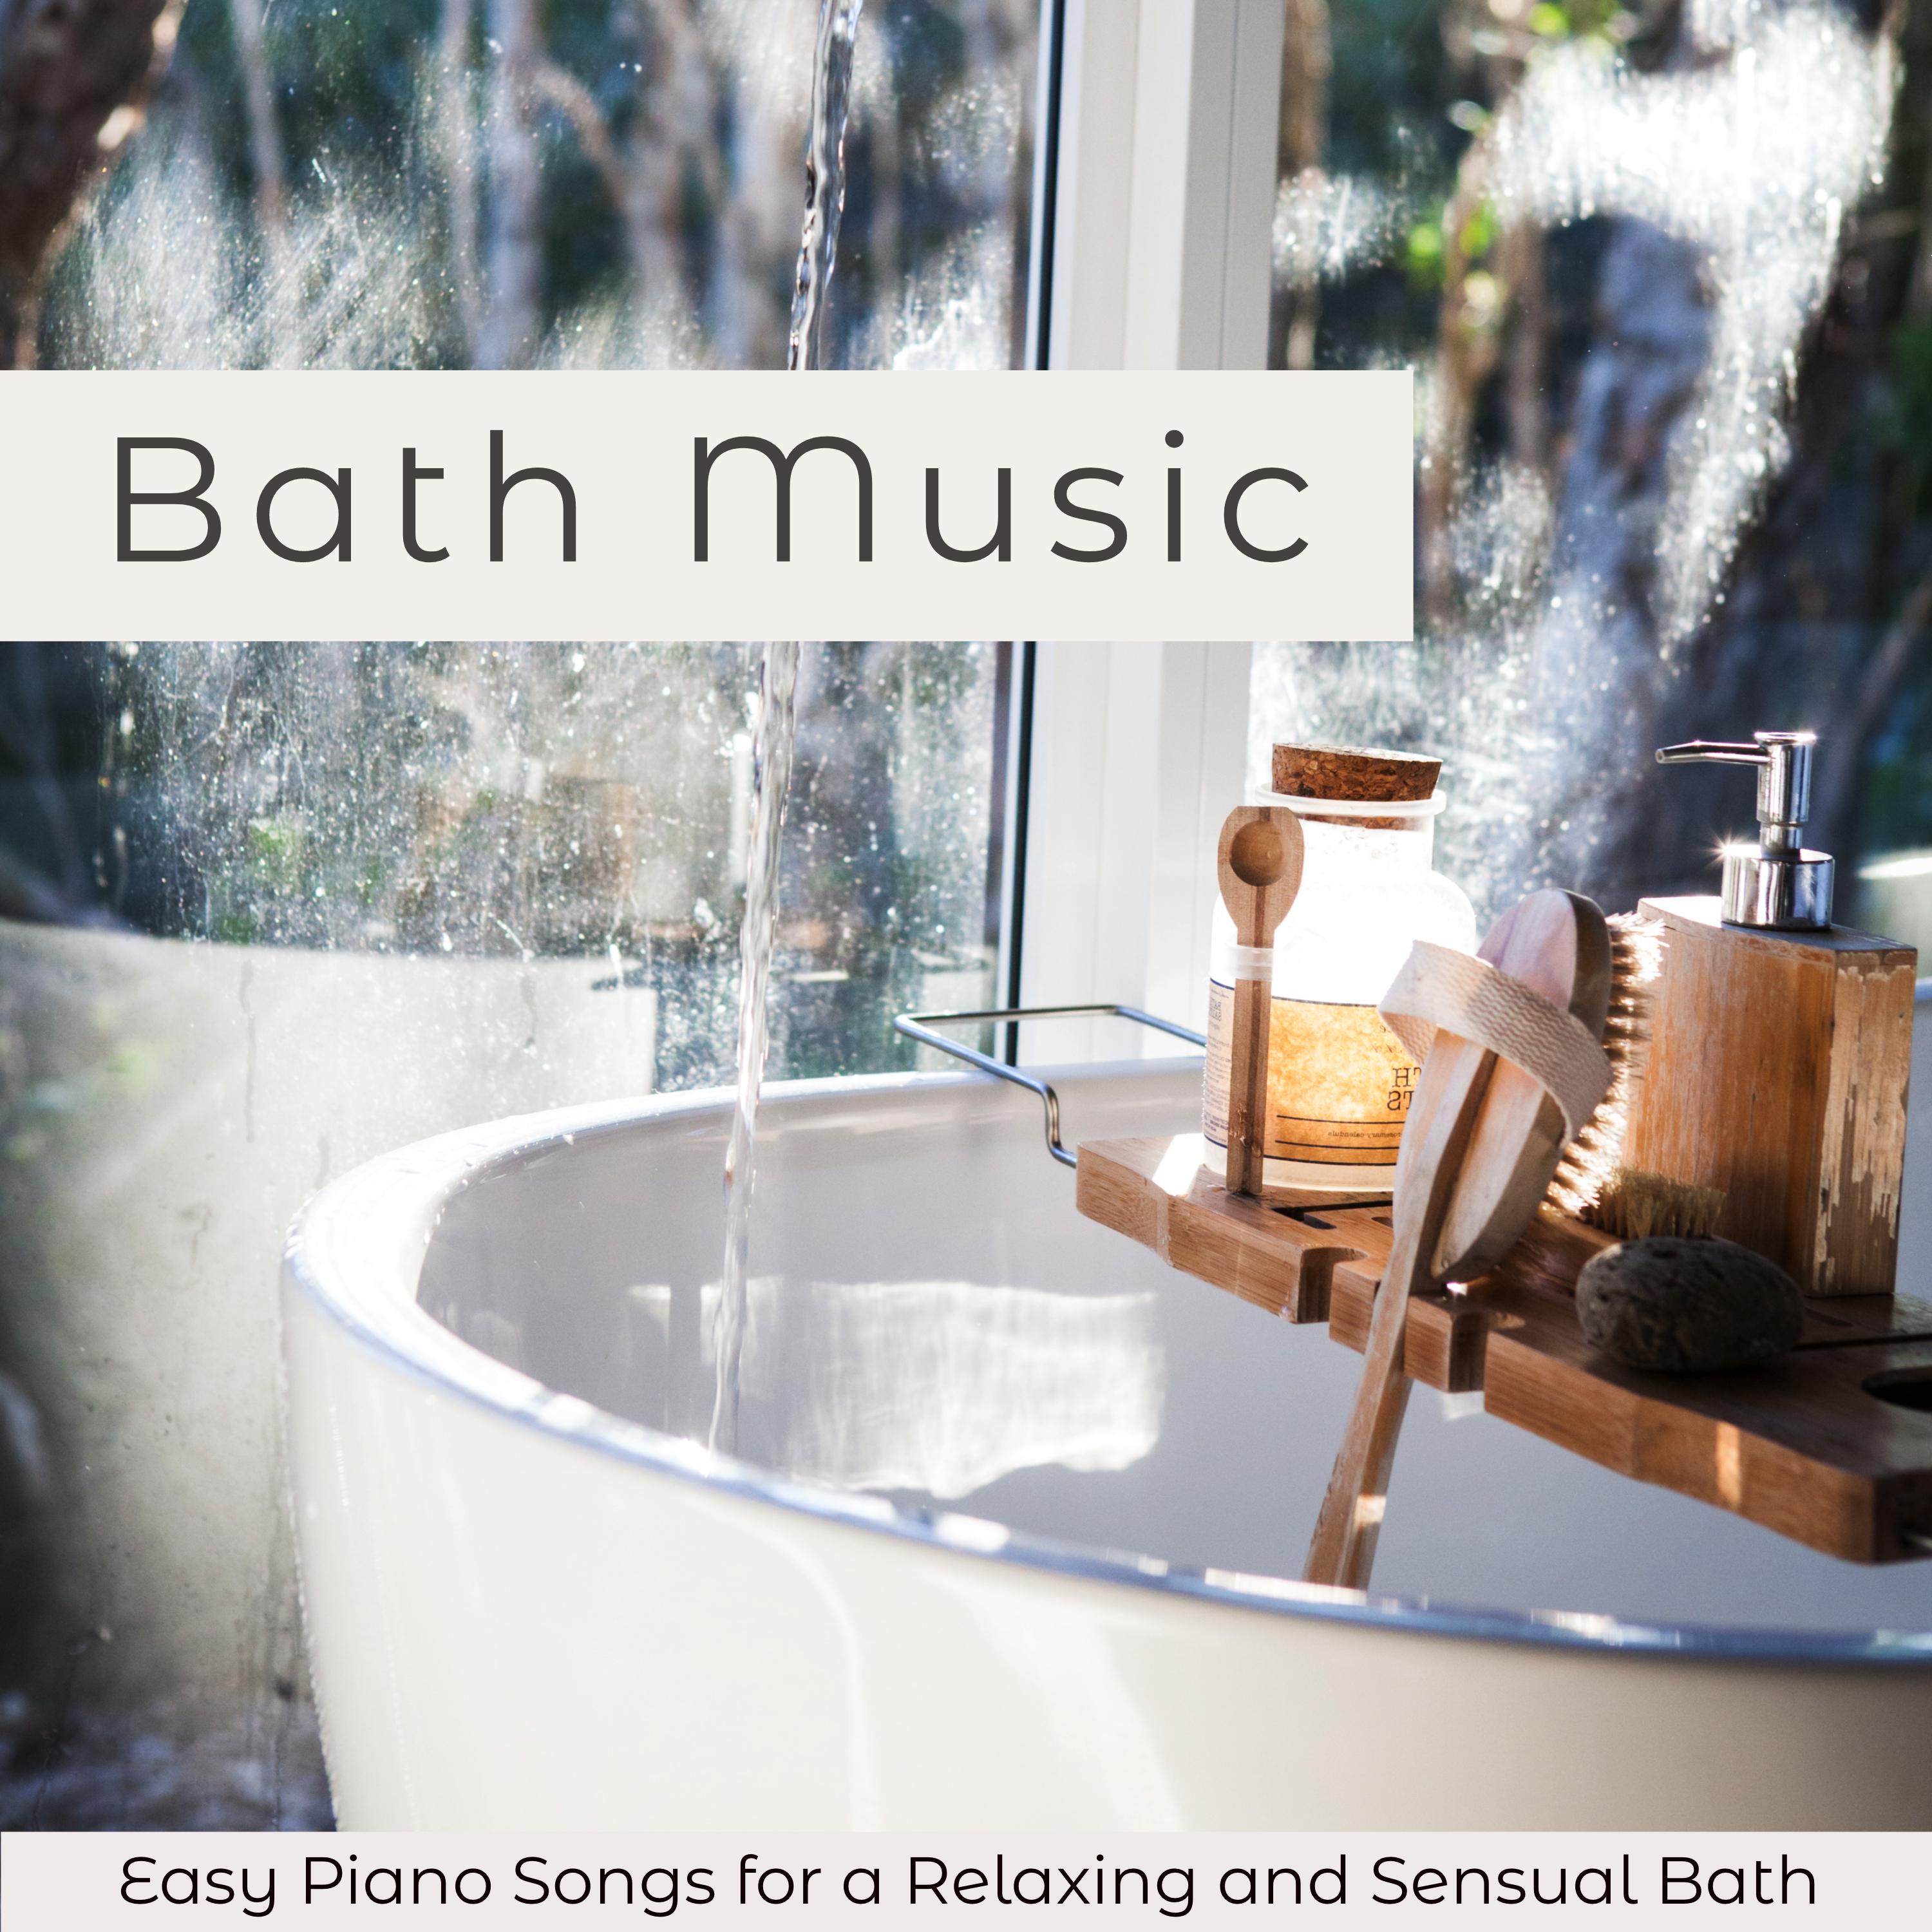 Bath Music  Easy Piano Songs for a Relaxing and Sensual Bath